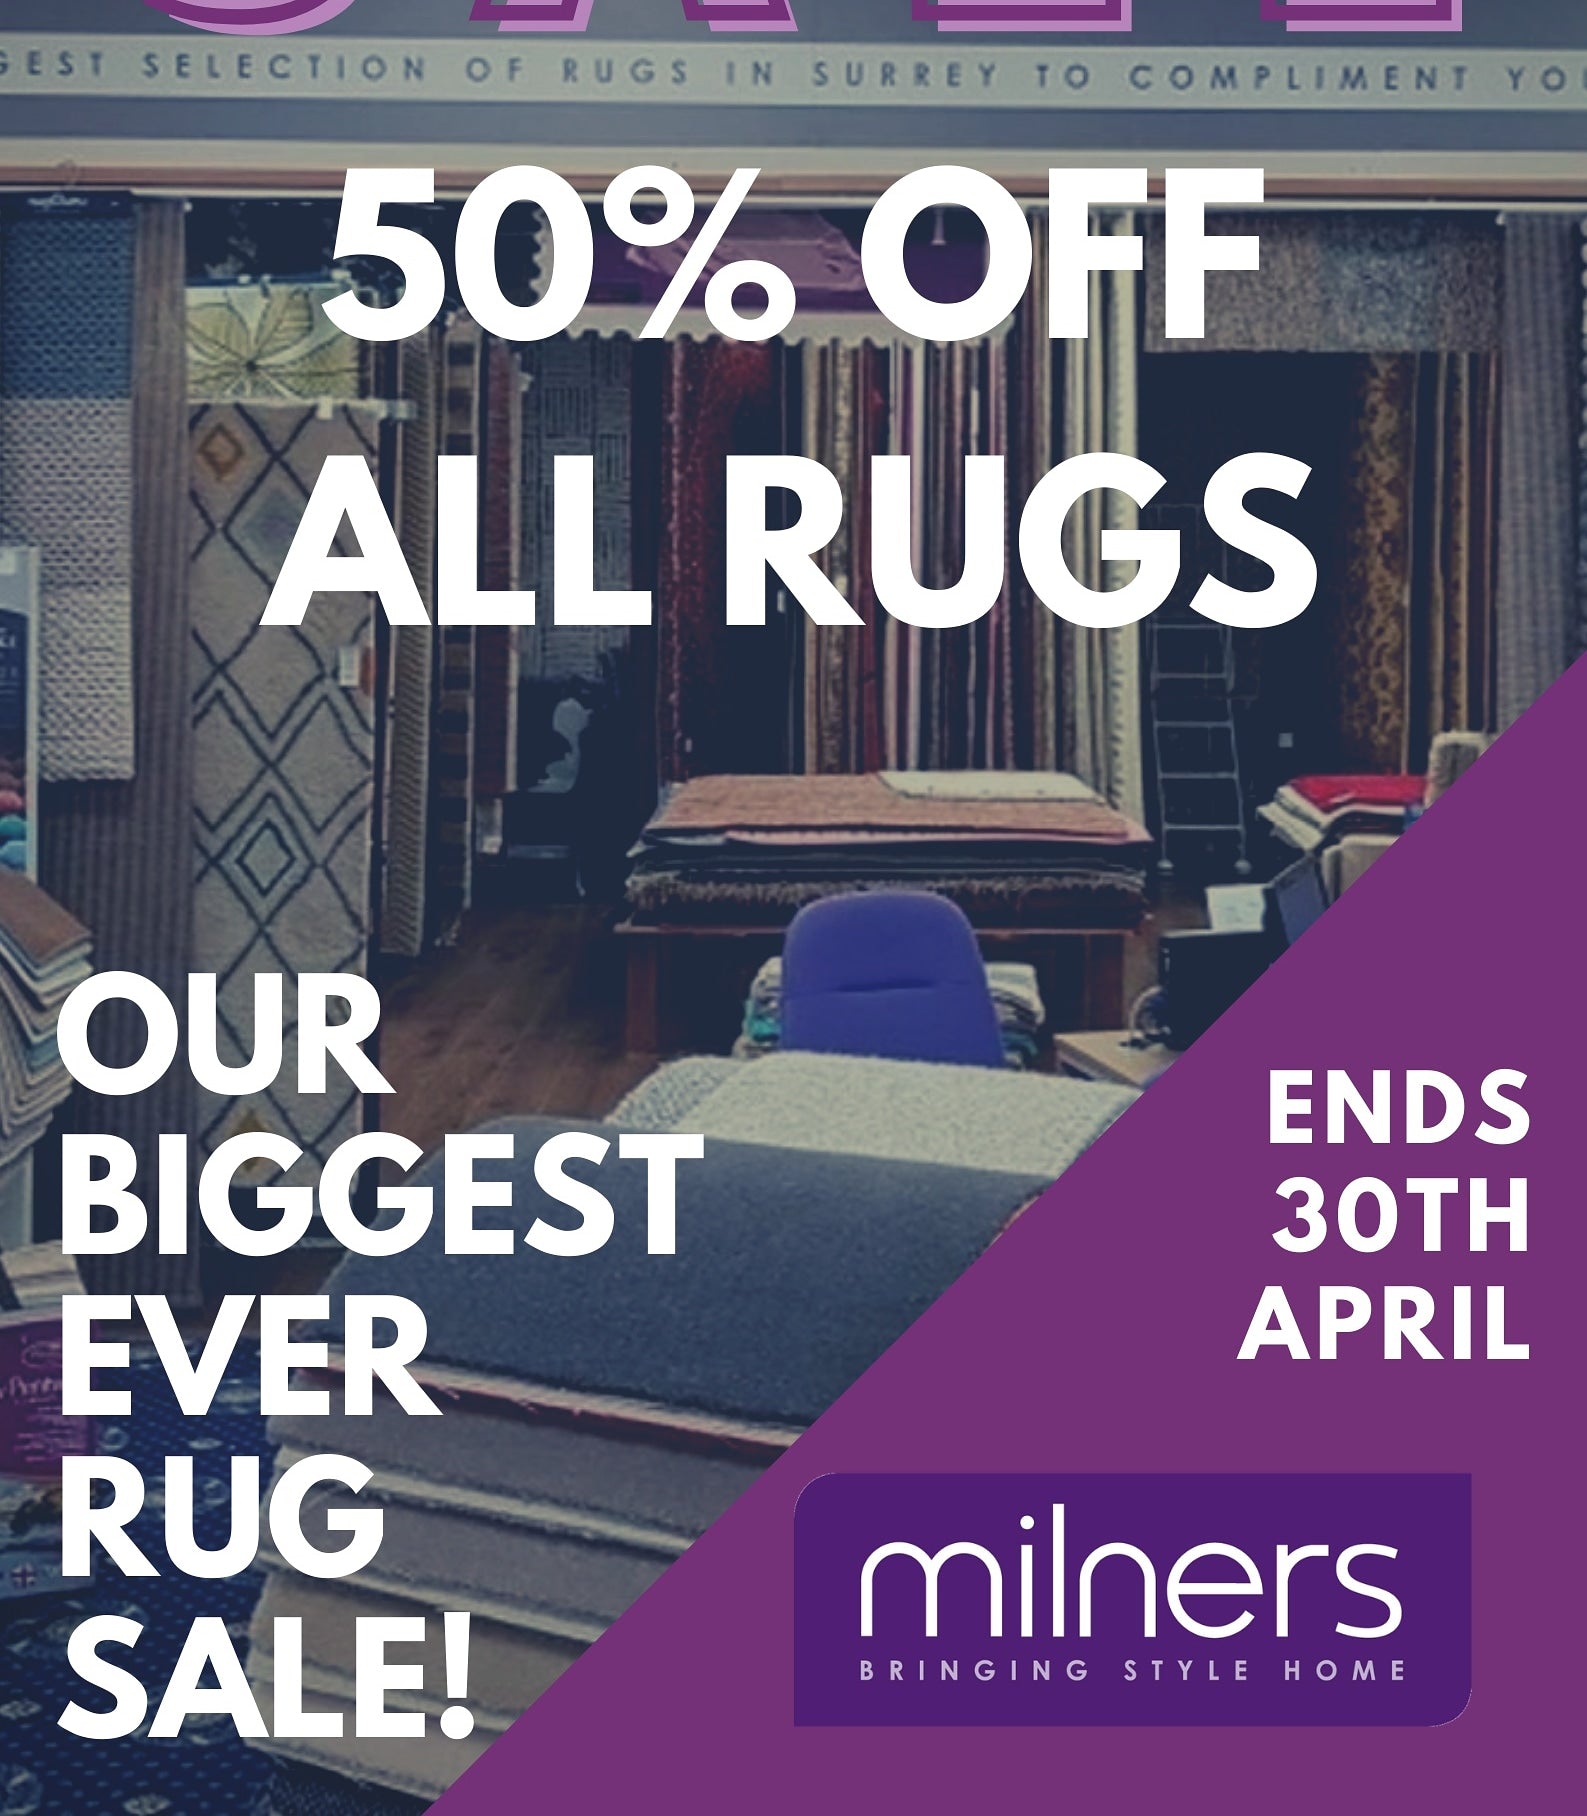 50% OFF ALL RUGS - MAKING ROOM FOR A NEW HIVE